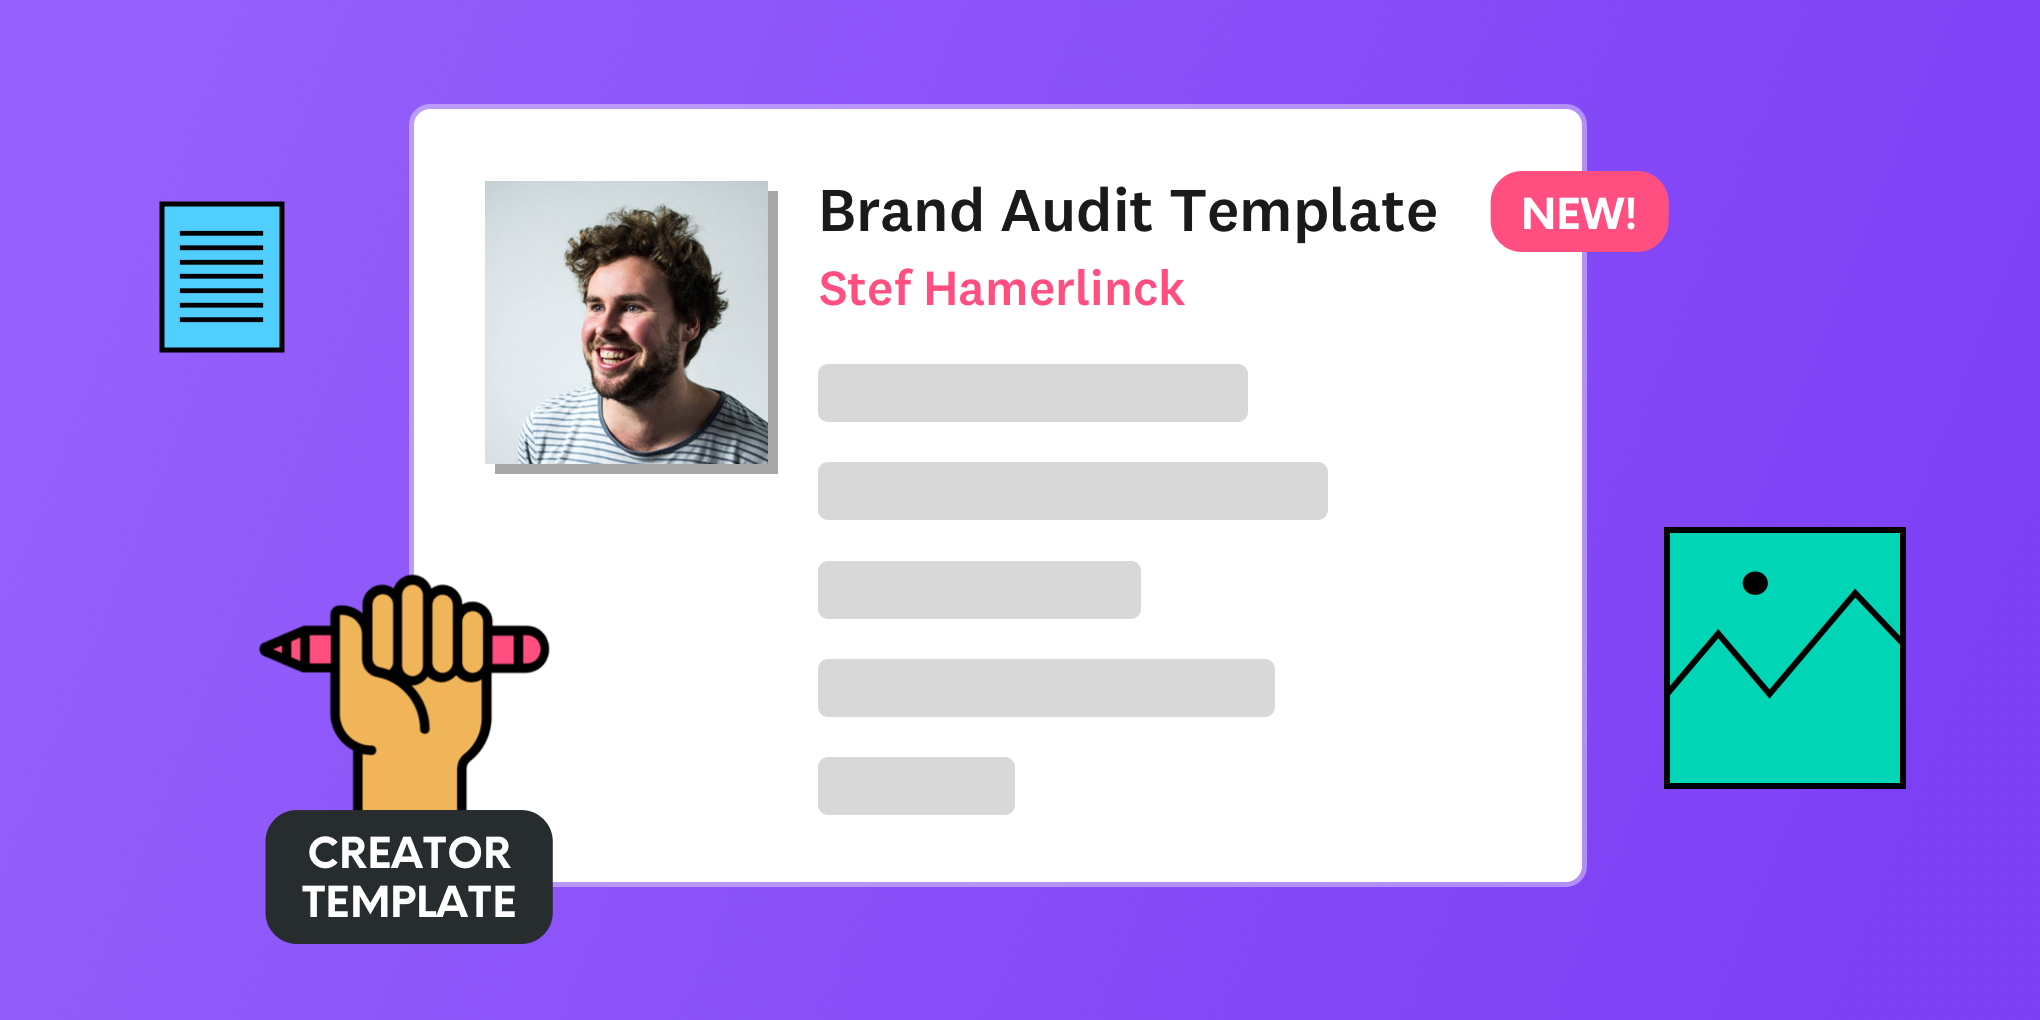 Introducing Creator Templates by Industry Experts